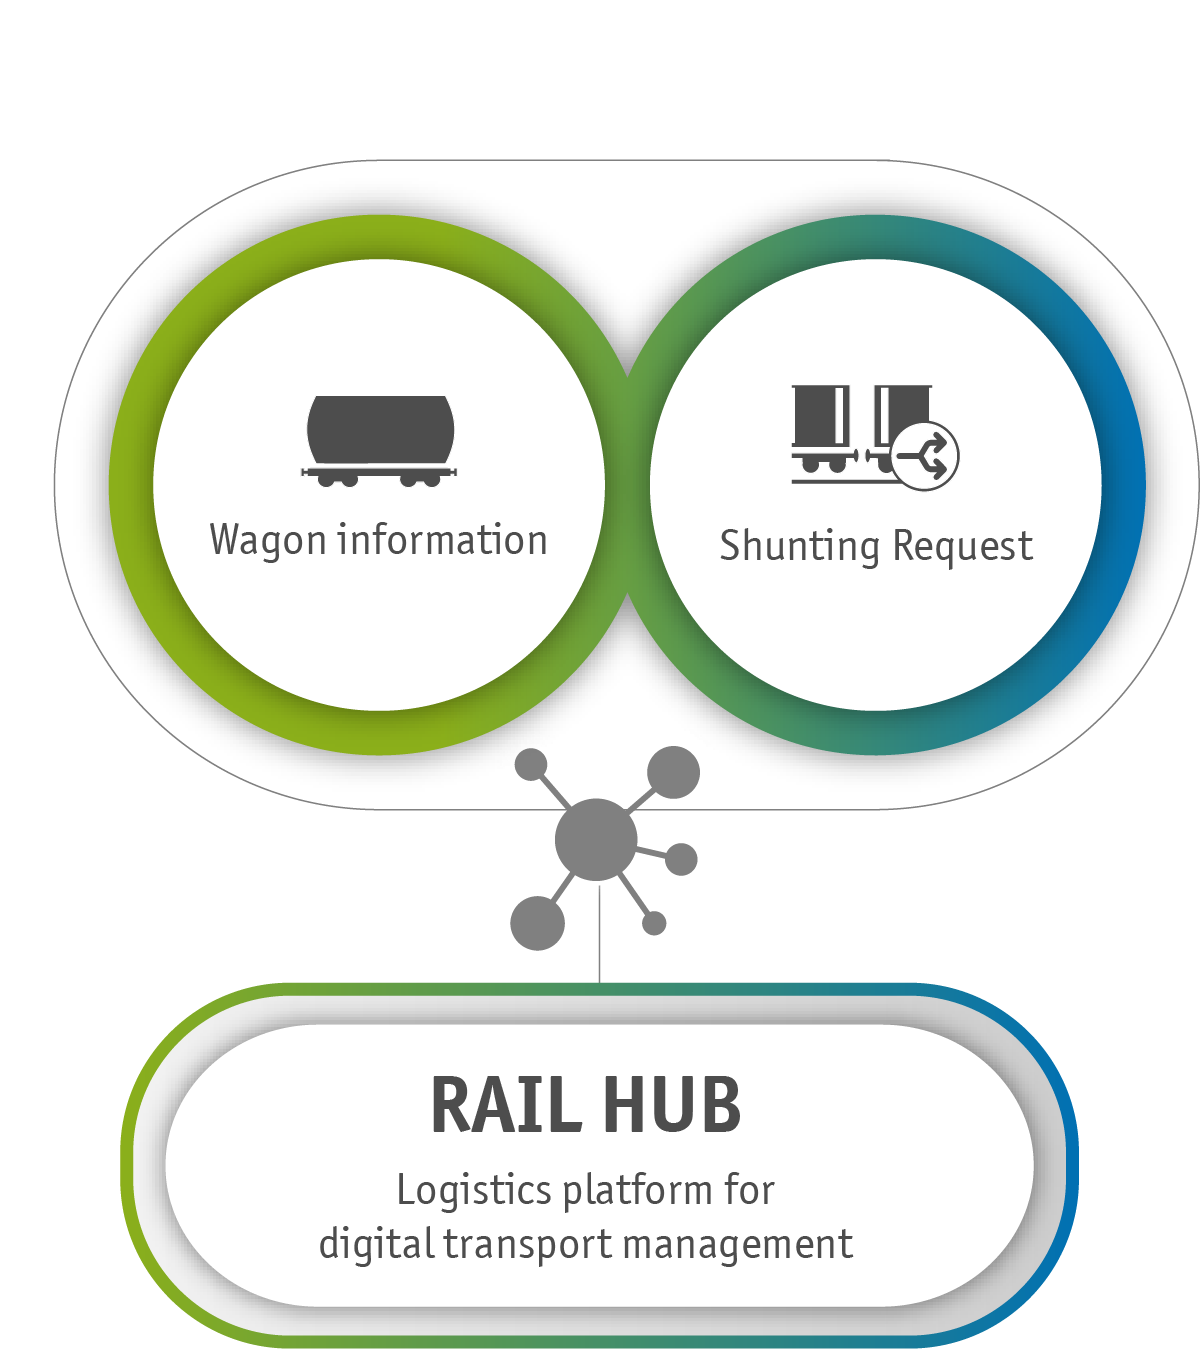 Overview of the functions of the web portal Rail Hub